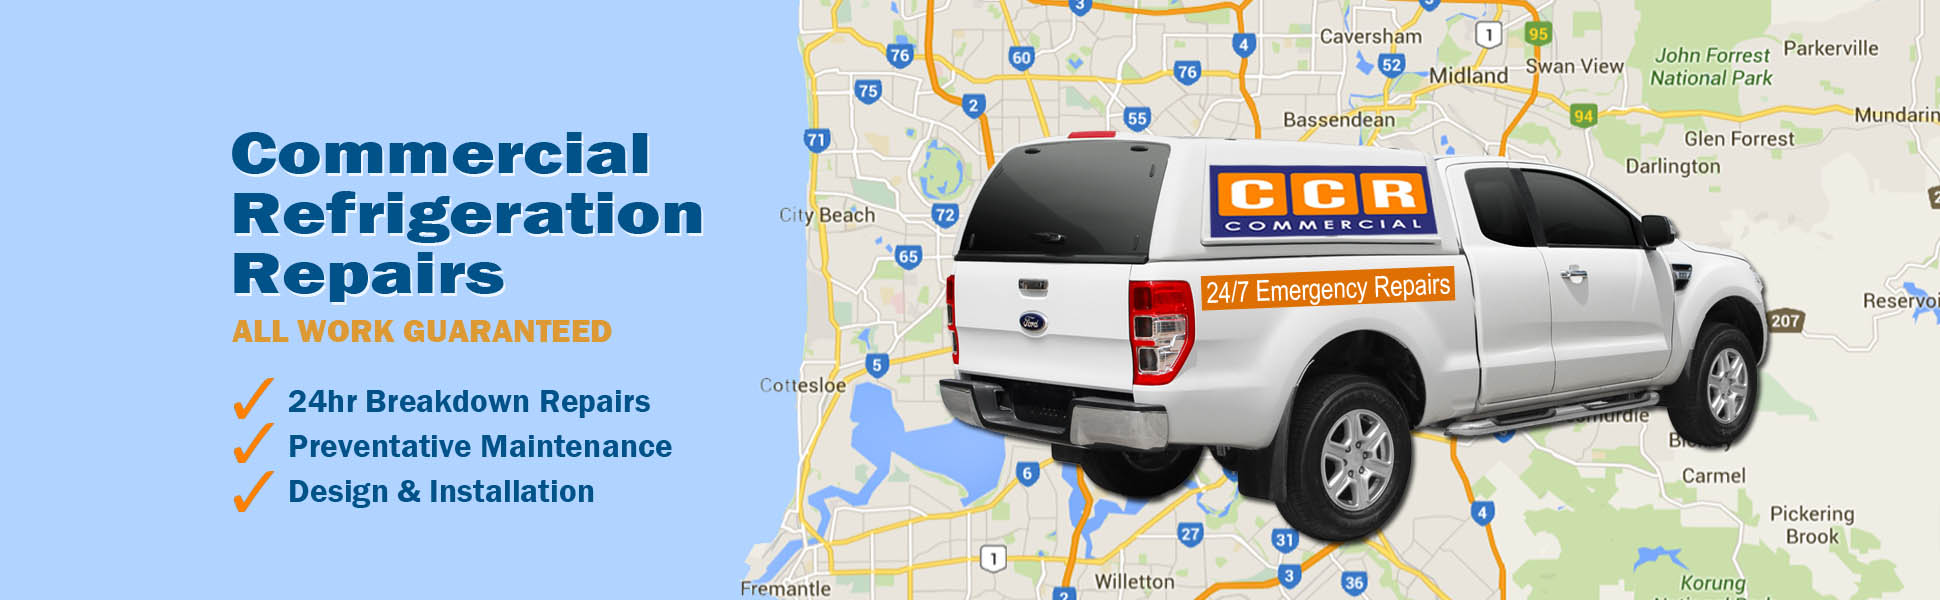 CCR Commercial Refrigeration Perth Repairs Sales Service